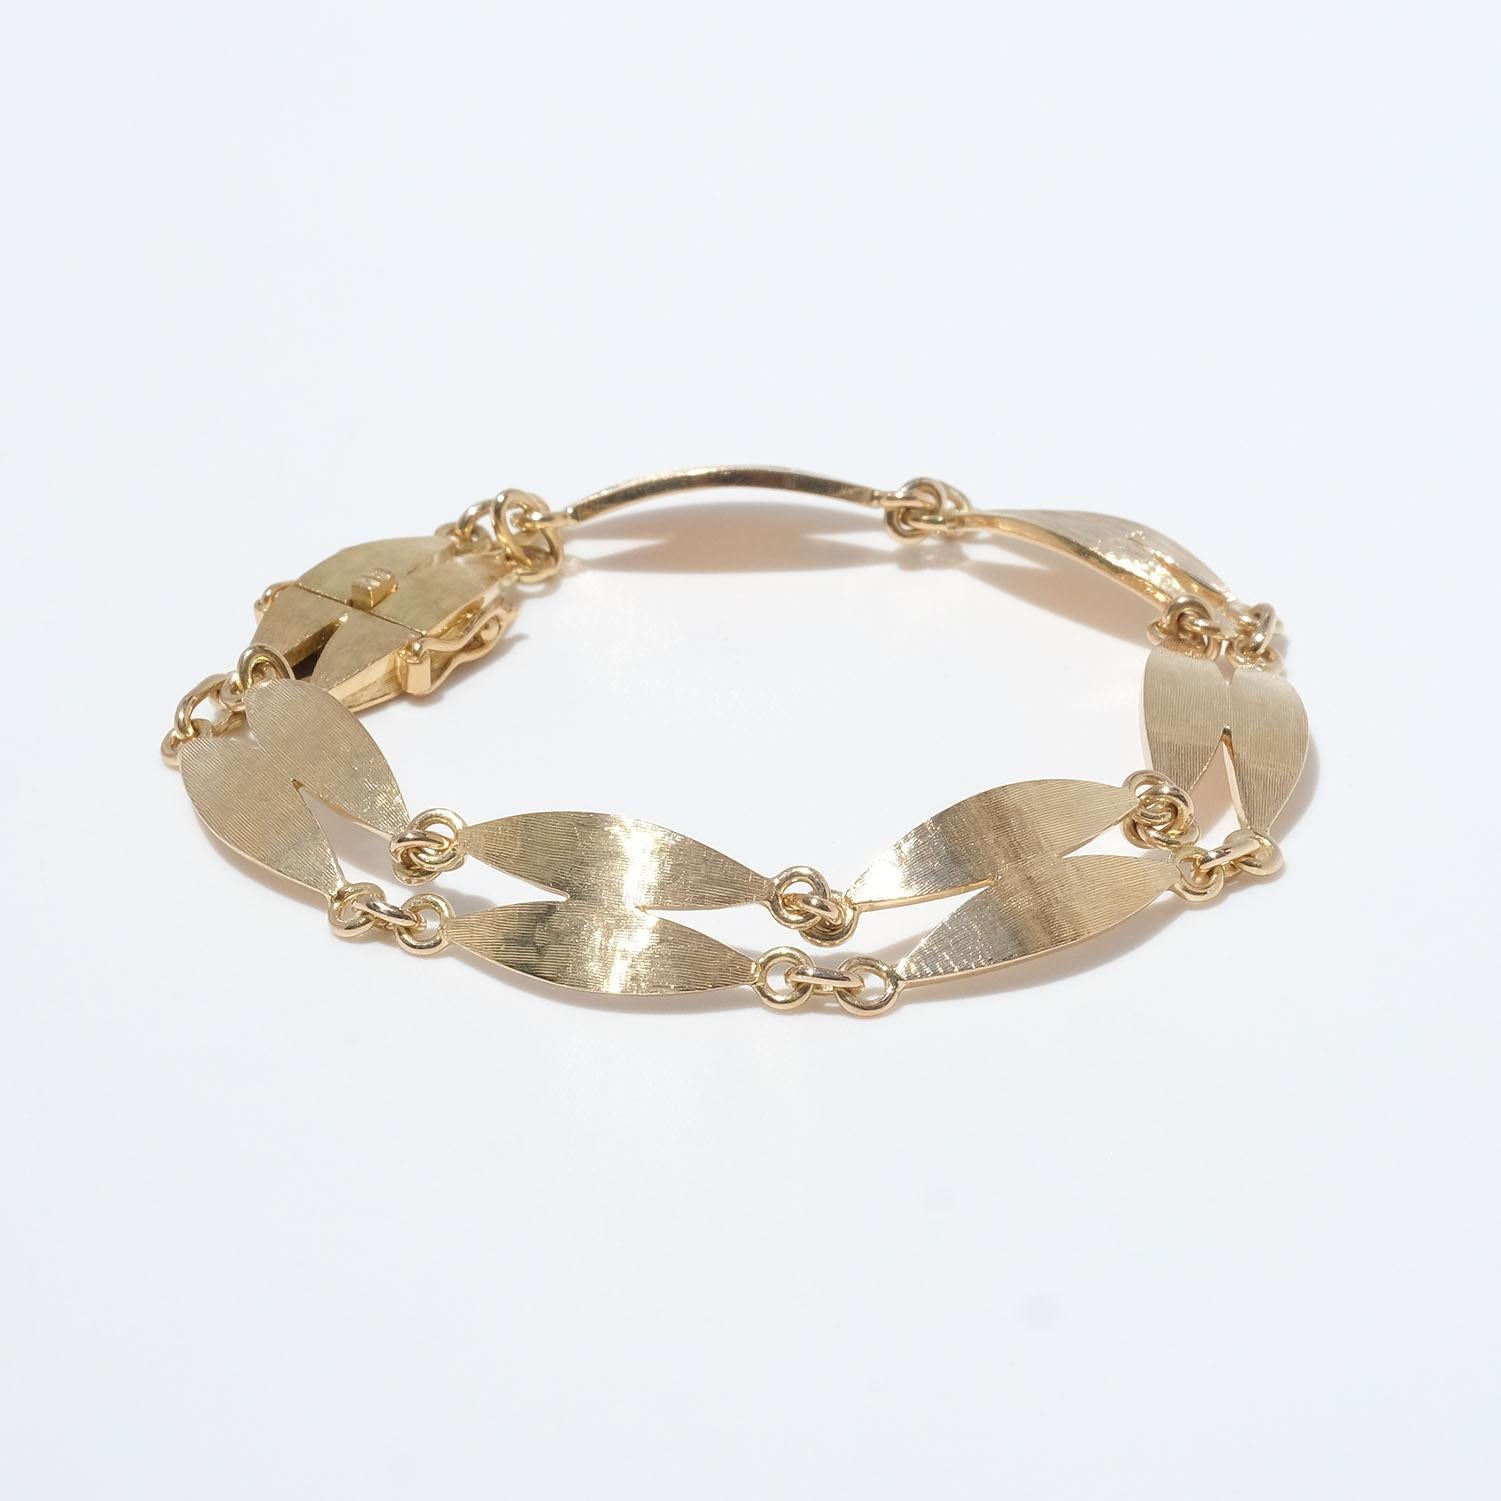 This 18 karat gold bracelet is made of oval double links which are linked together with small gold rings. The links have a matte and brushed surface. The bracelet closes easily with a box clasp.

The bracelet has a traditional, classic style and is